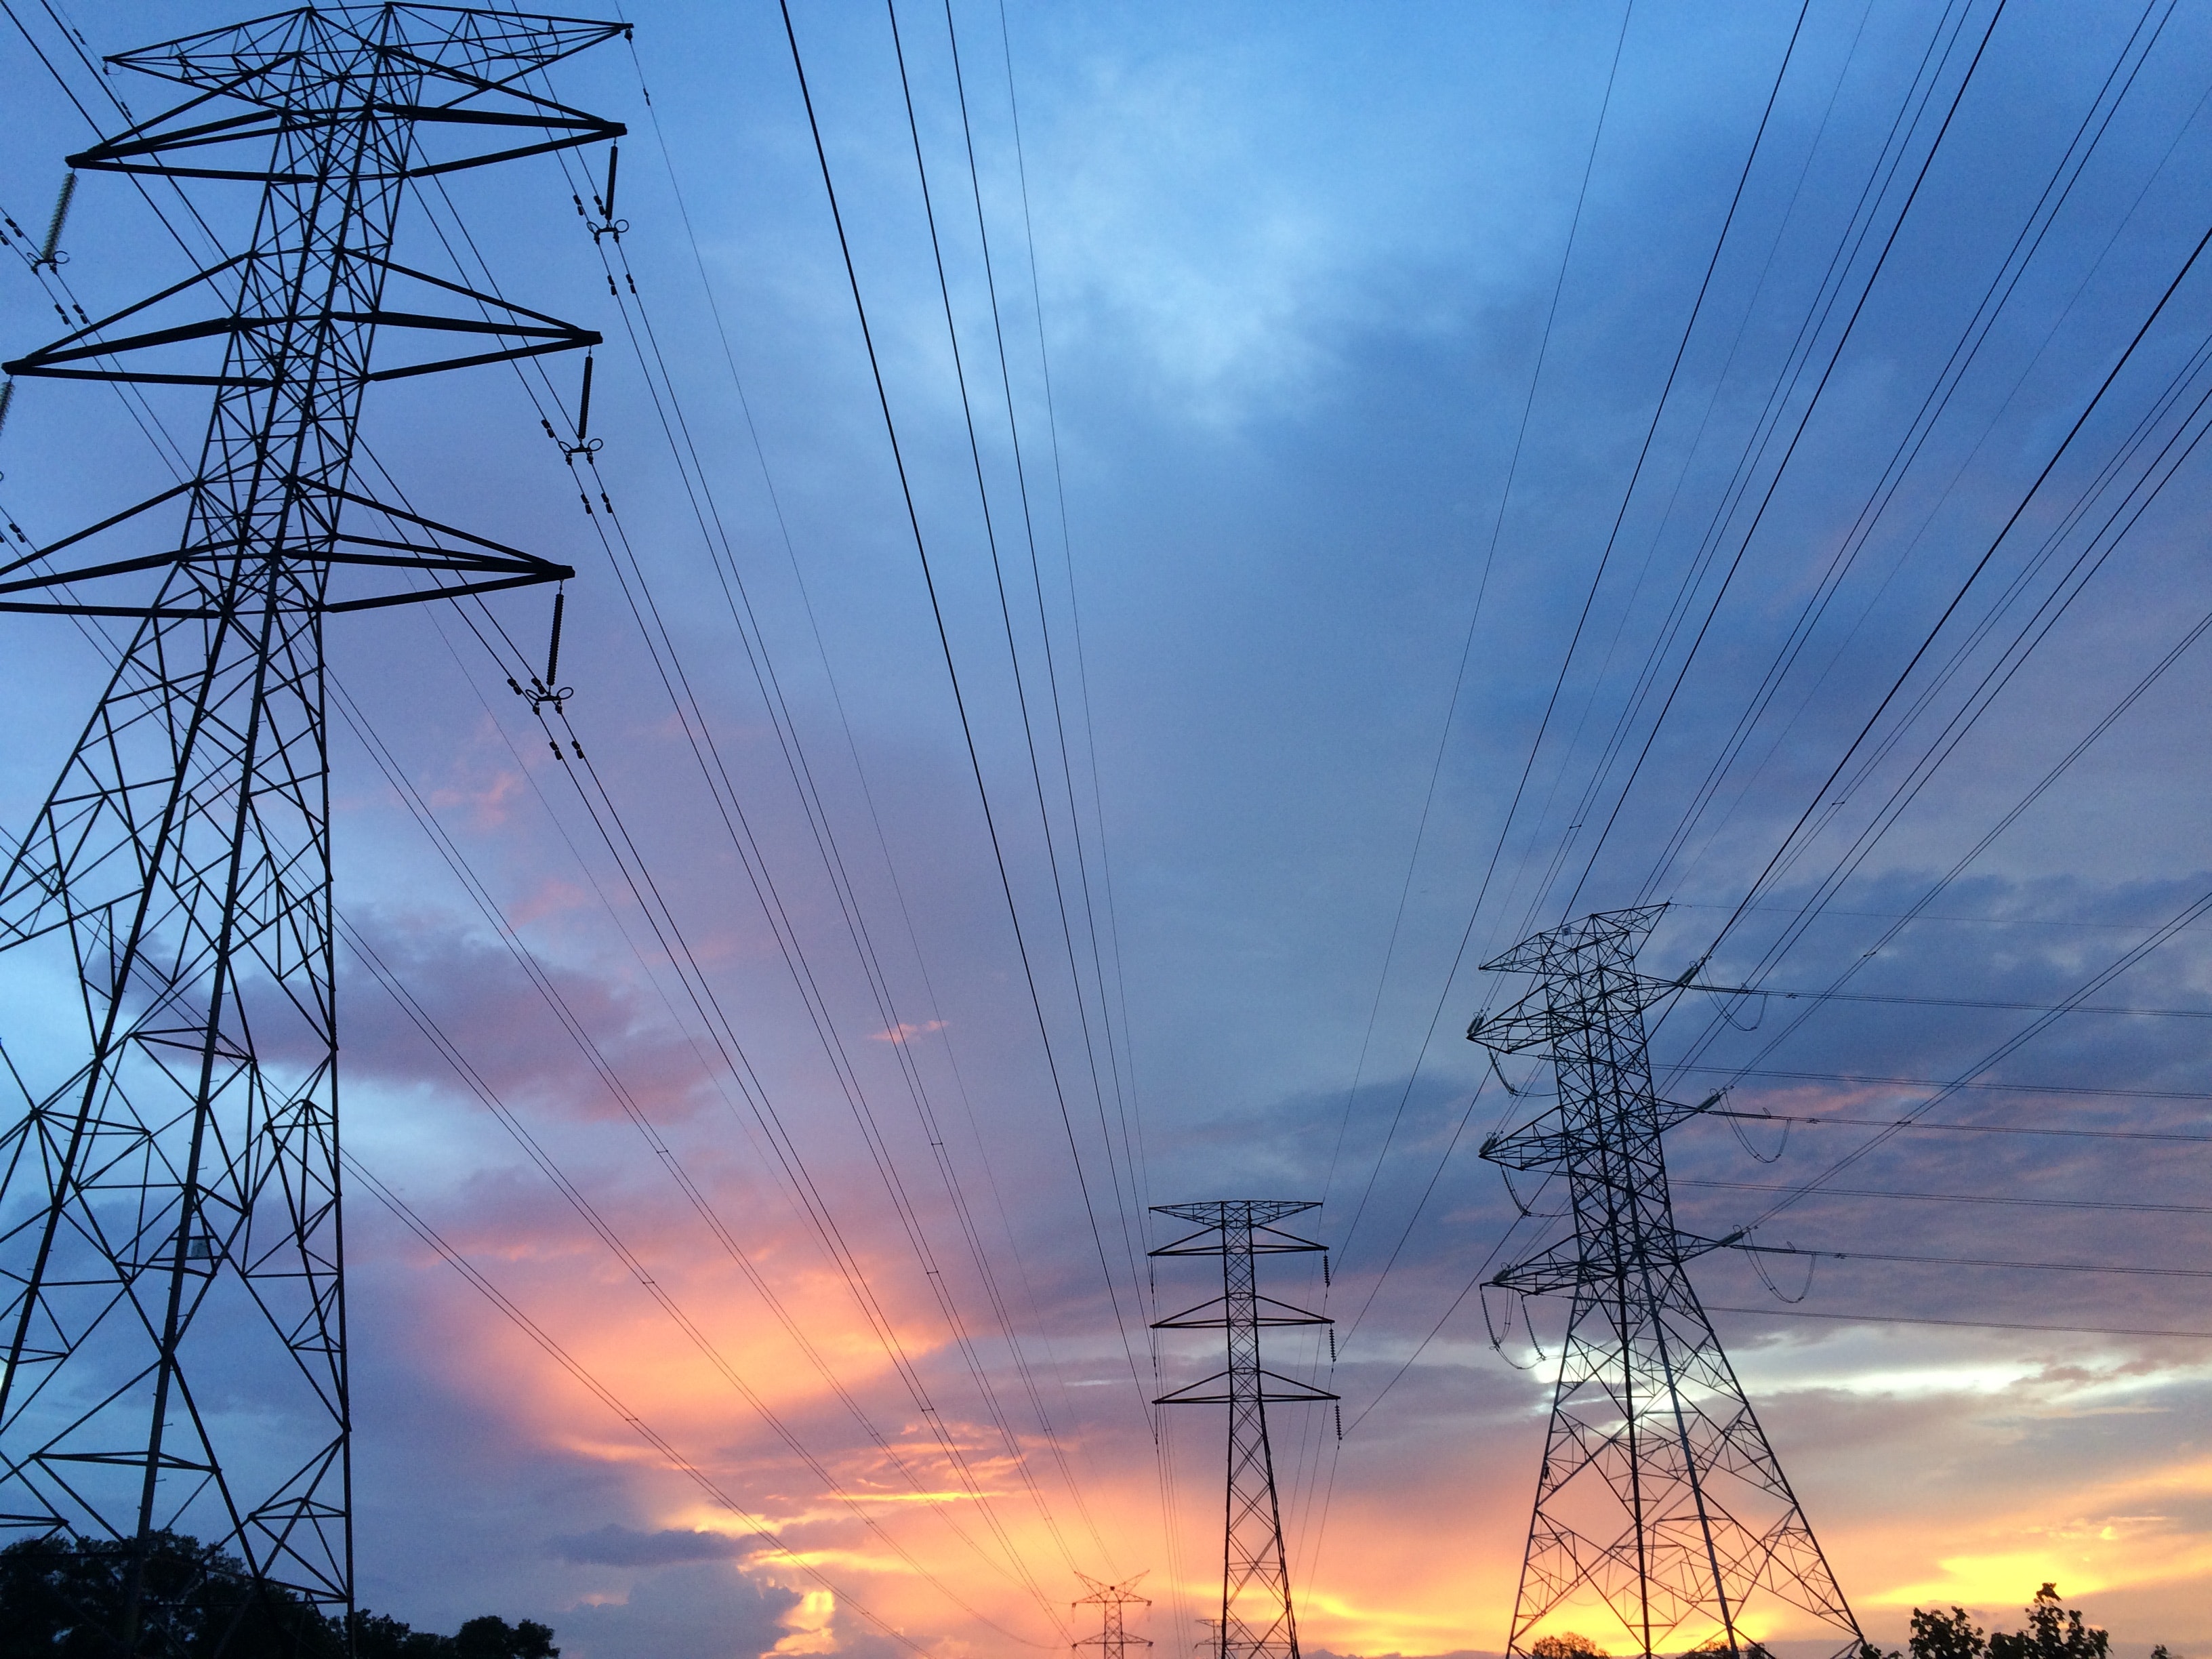 Energy infrastructure due diligence